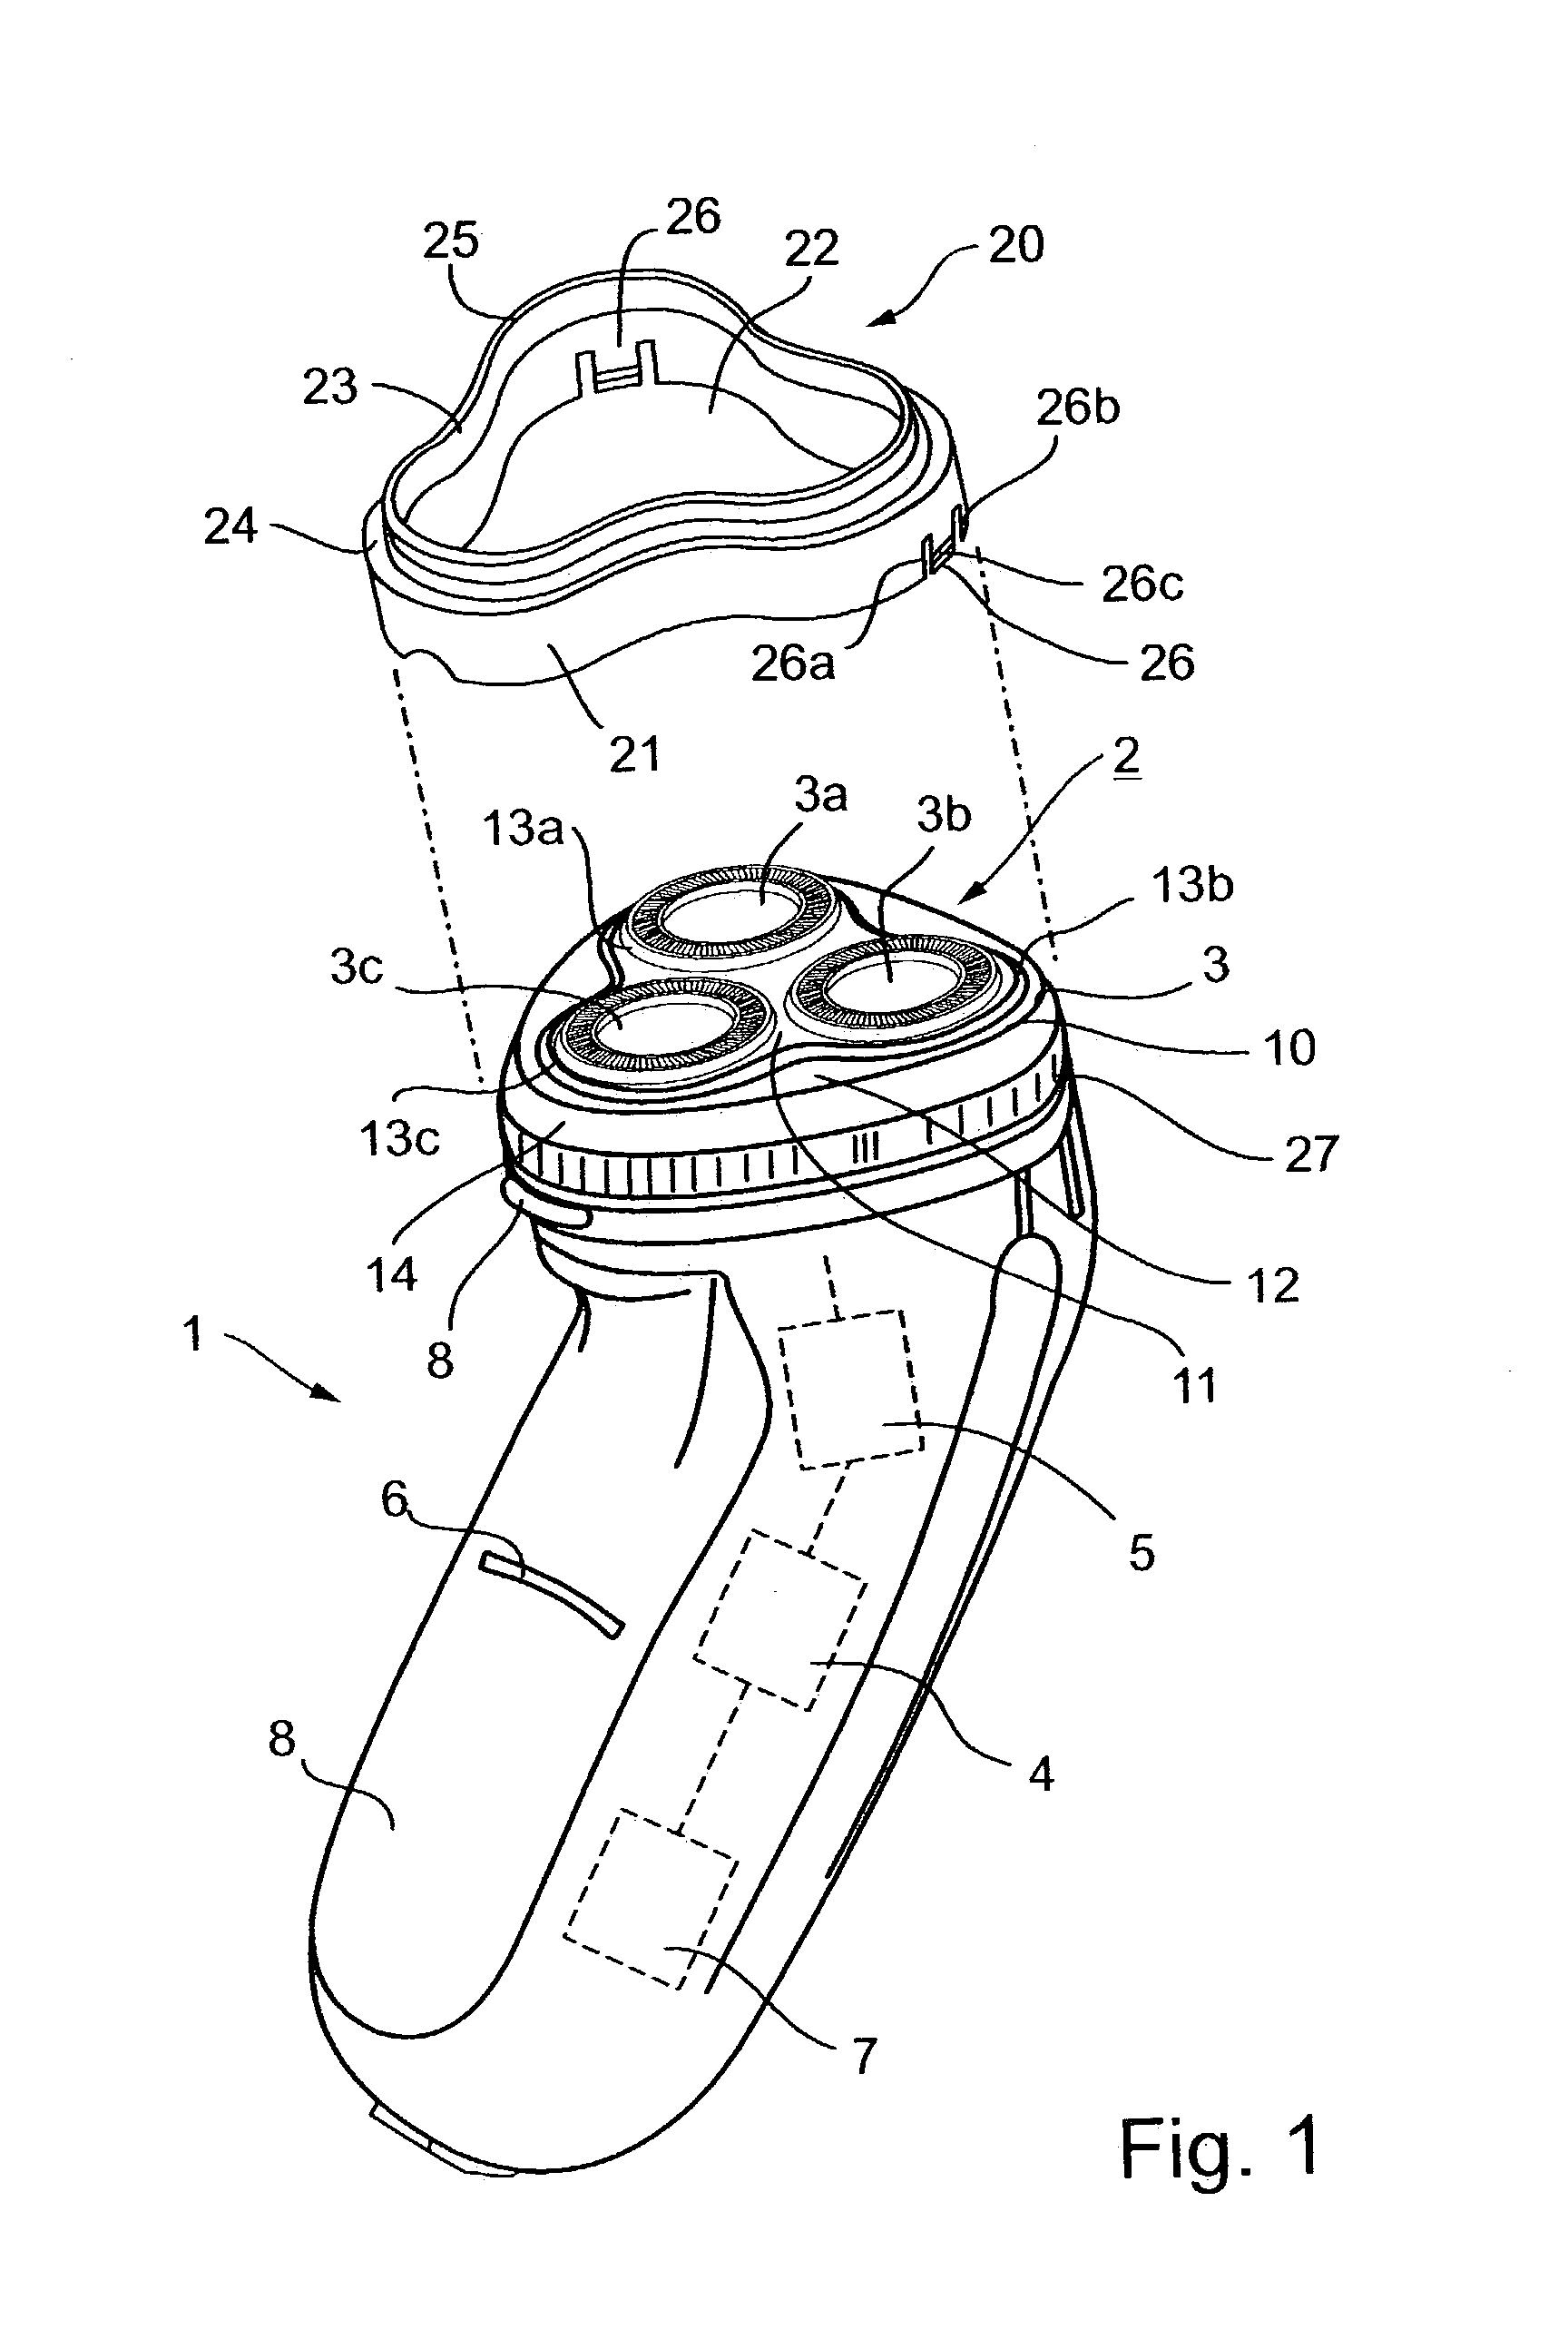 Attachments for electrical shaver and auxiliary cleaning device useful for electrical shaver